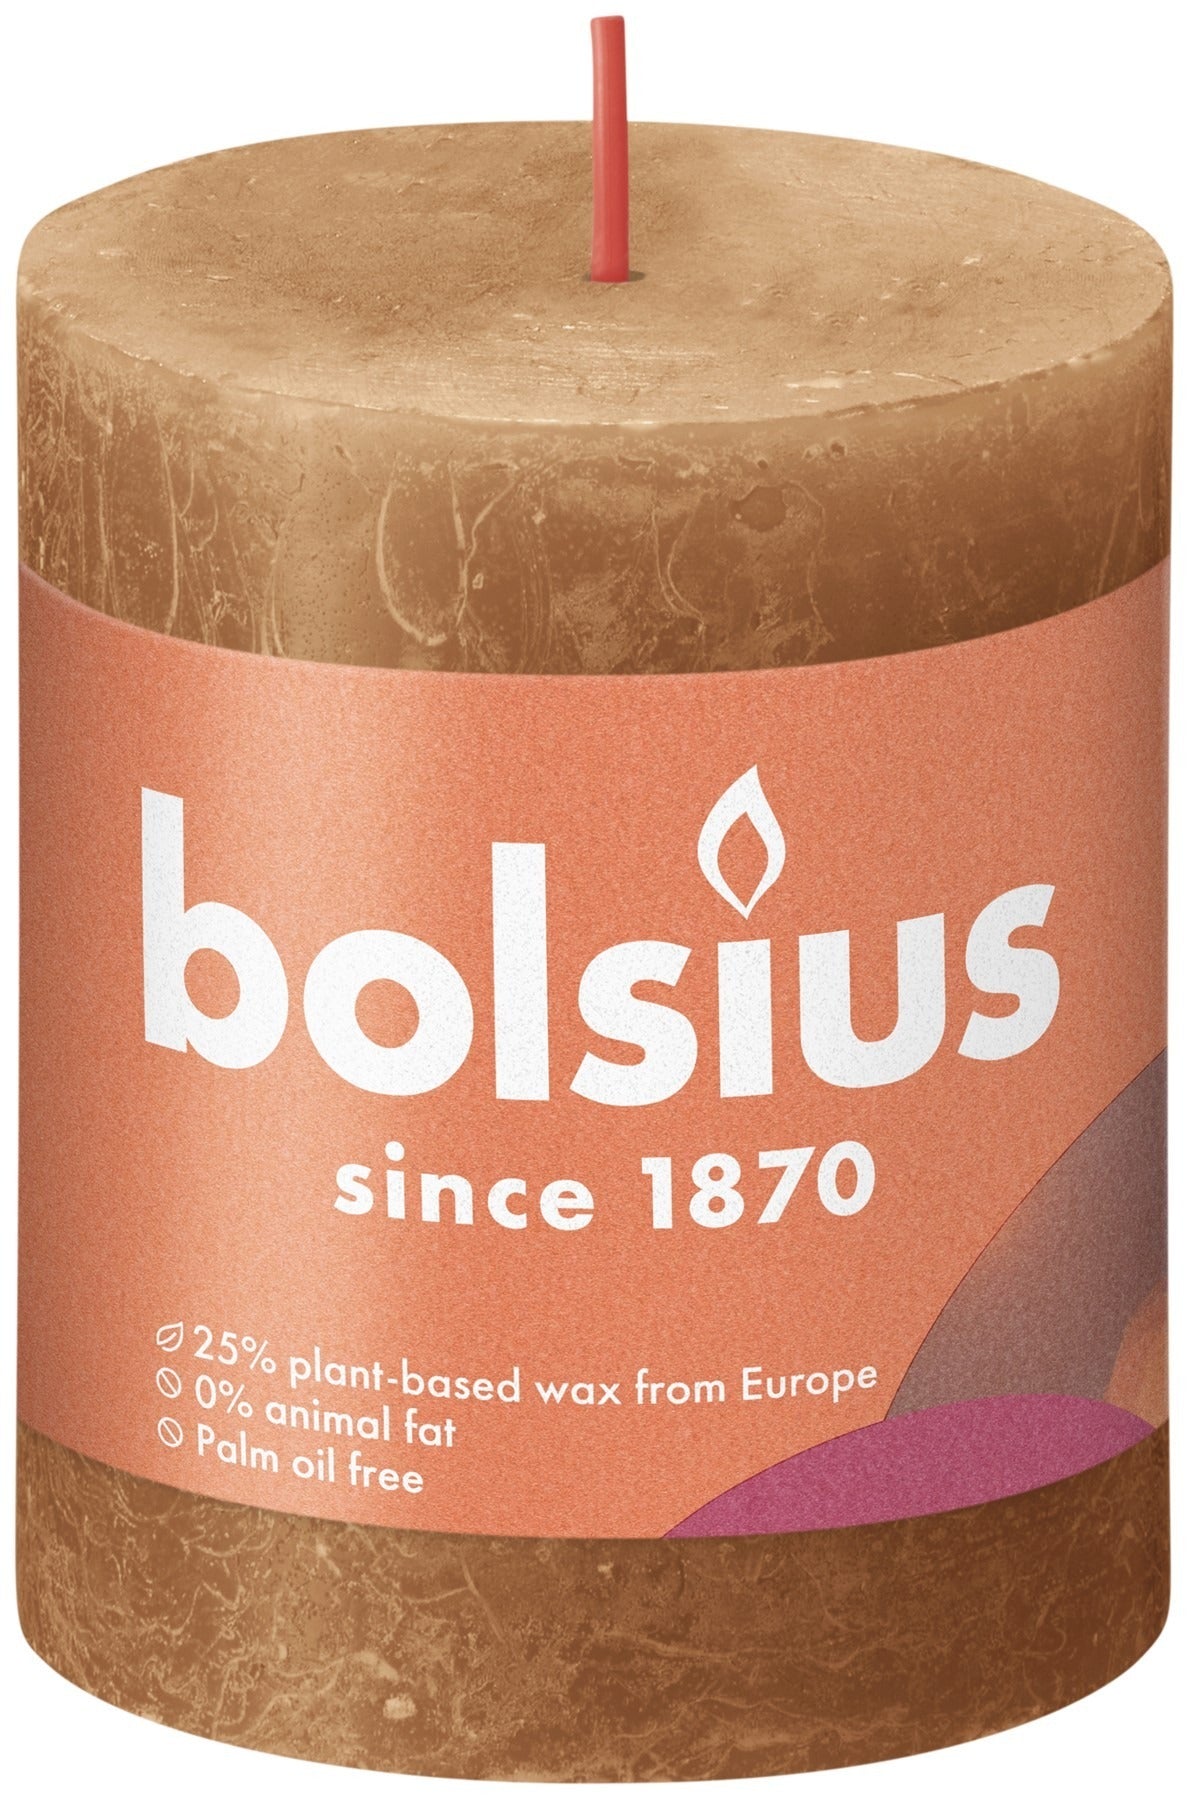 View Spice Brown Bolsius Rustic Shine Pillar Candle 80 x 68mm information